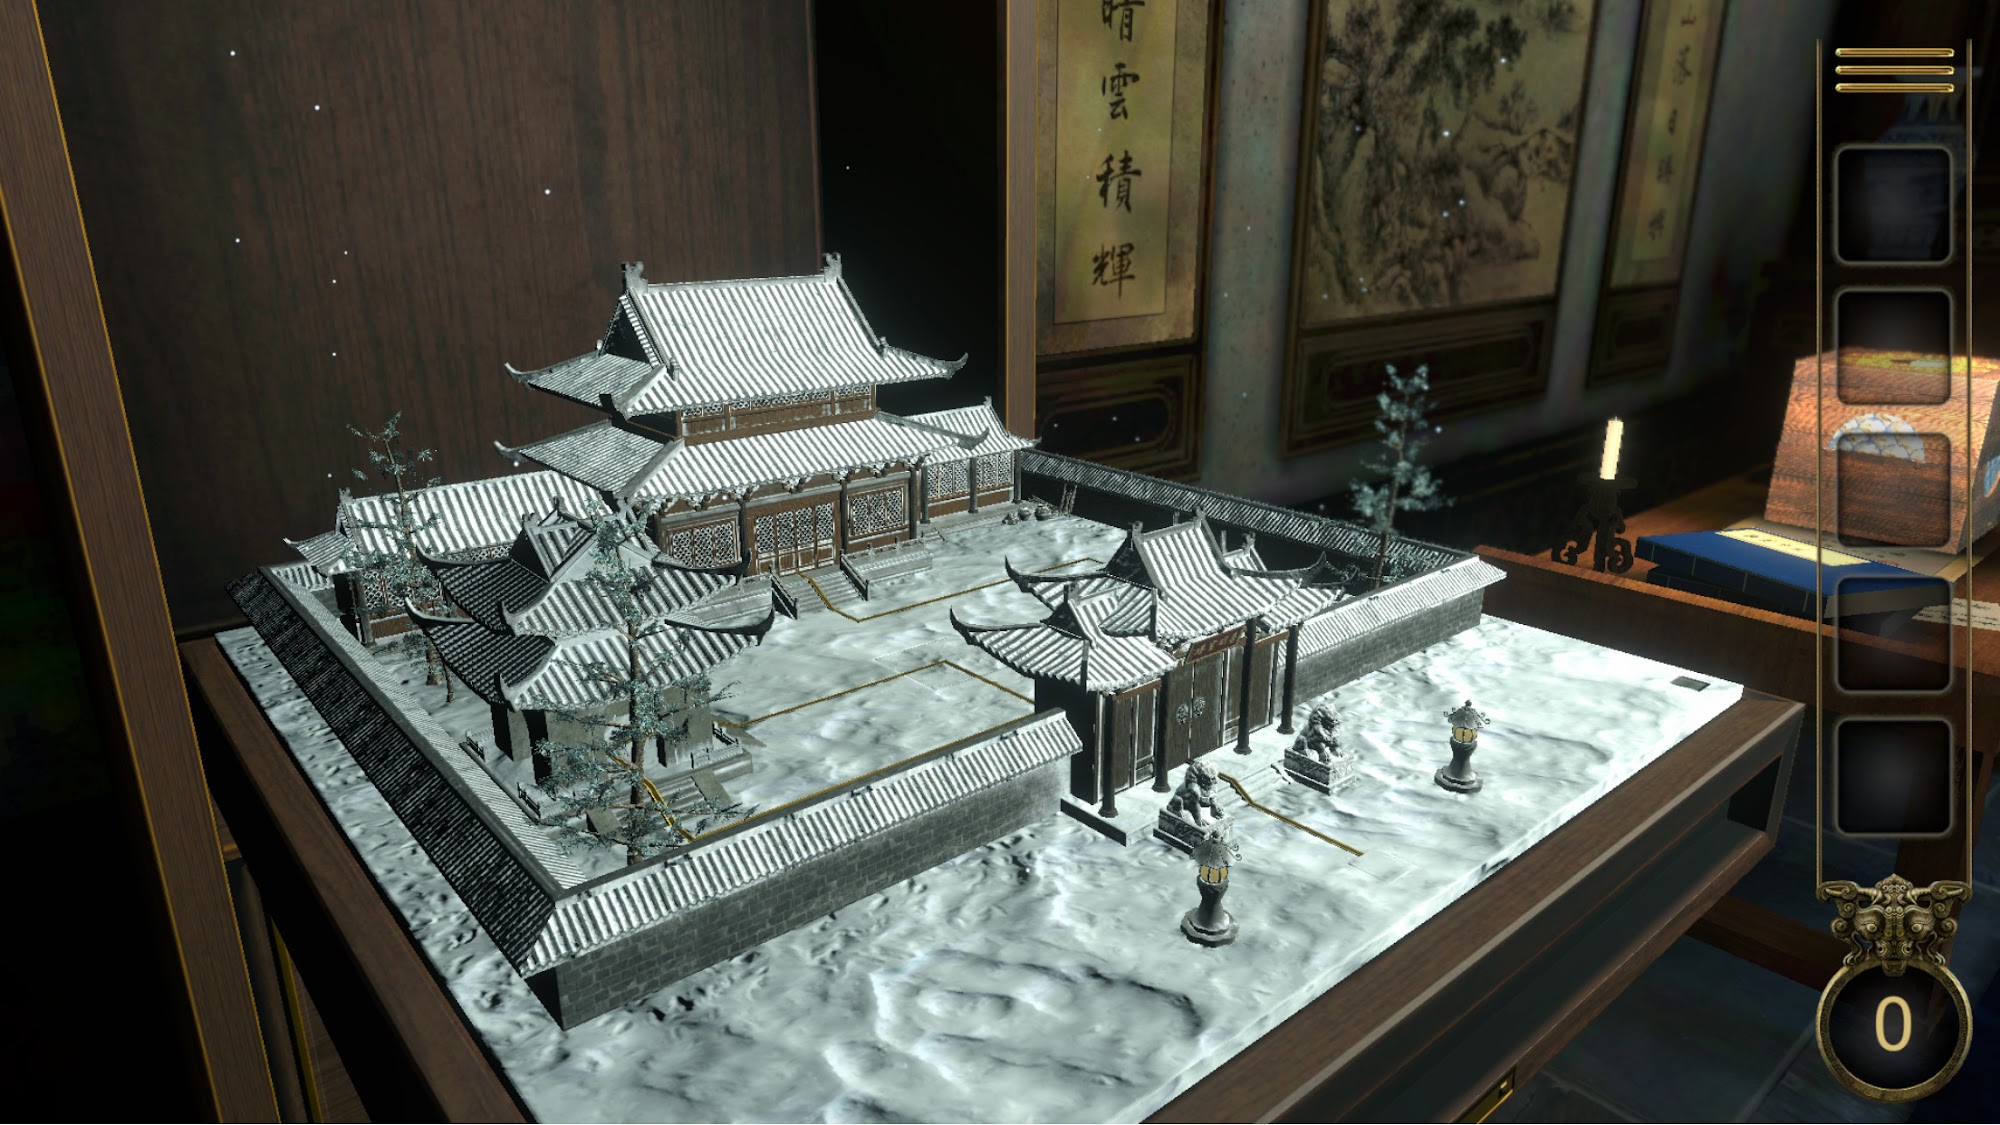 3D Escape game : Chinese Room